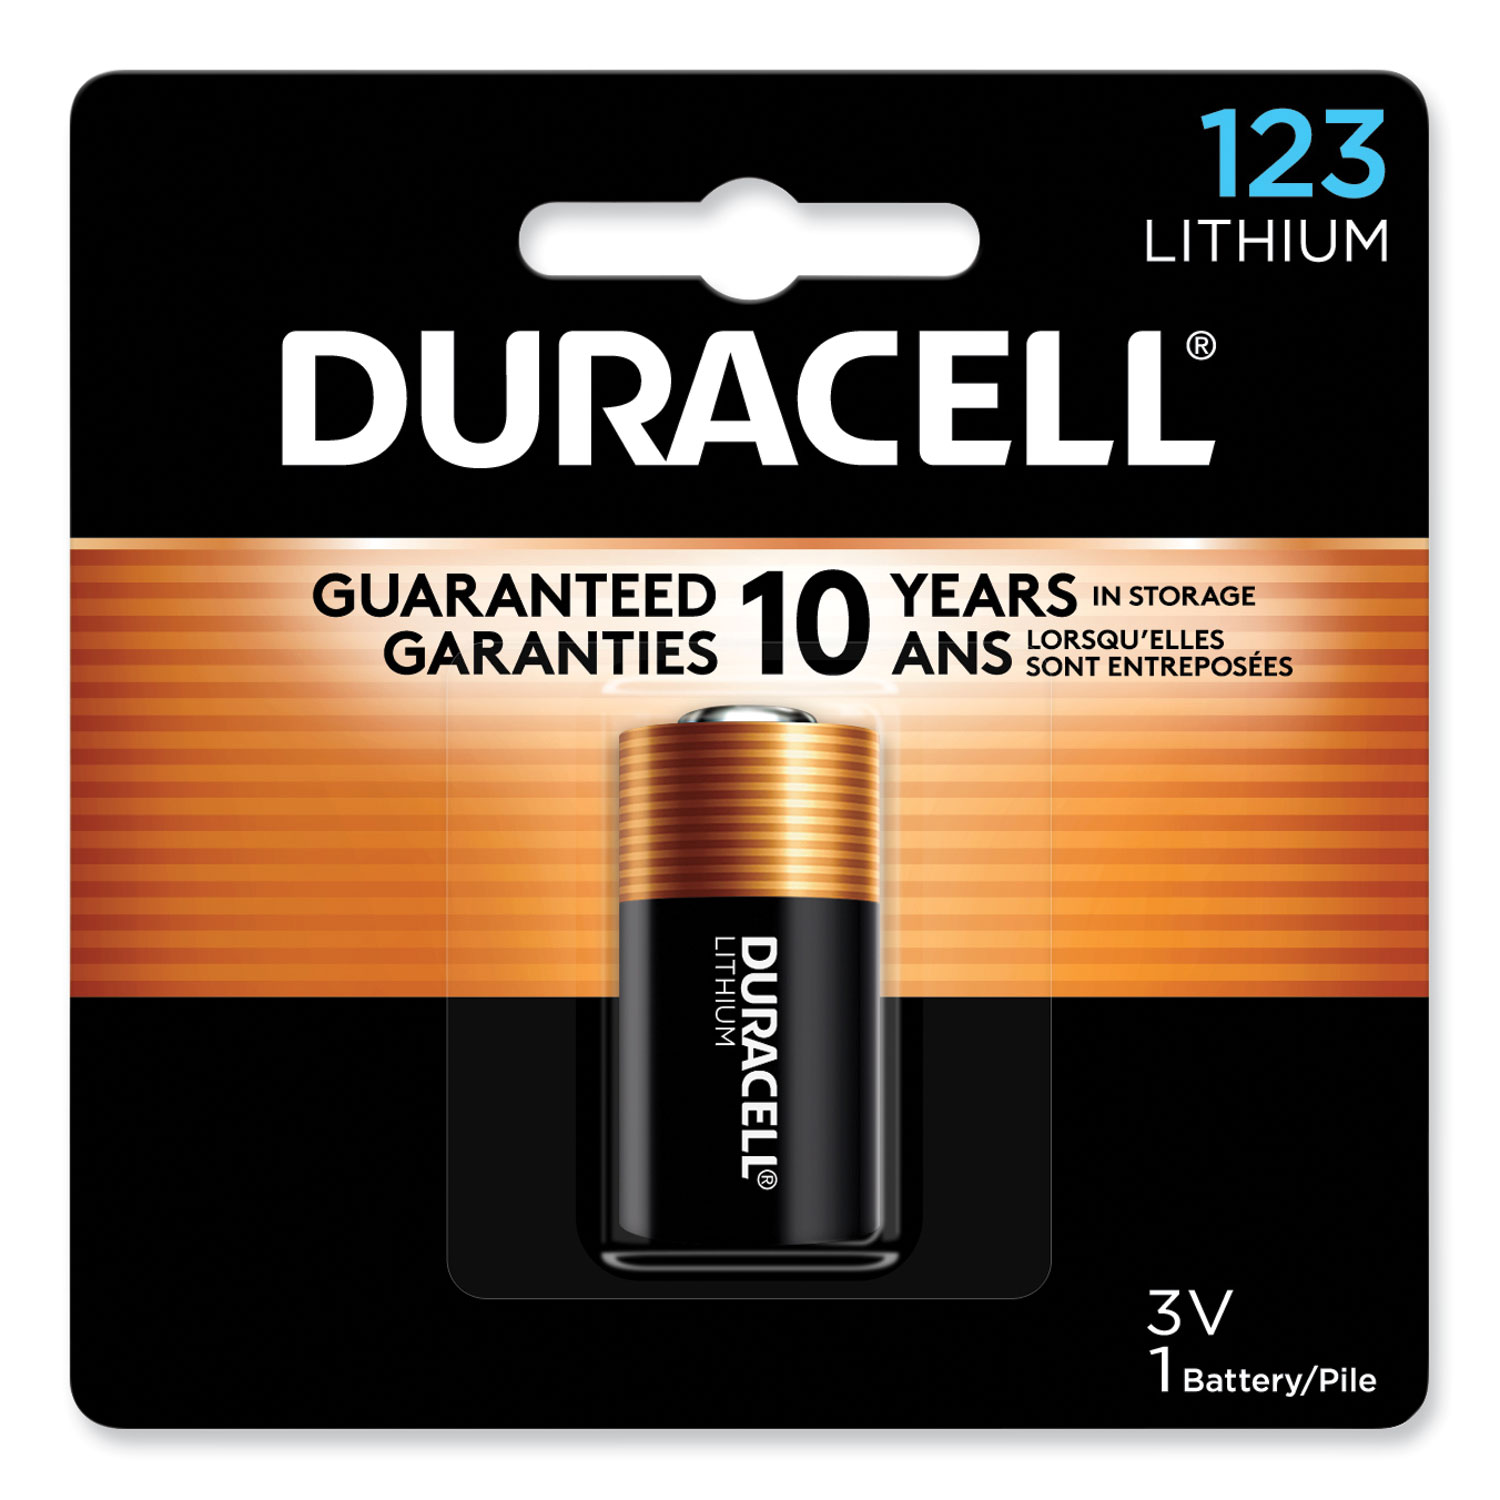 3) Duracell® 123 Lithium 3V Specialty Battery Box 844949009294